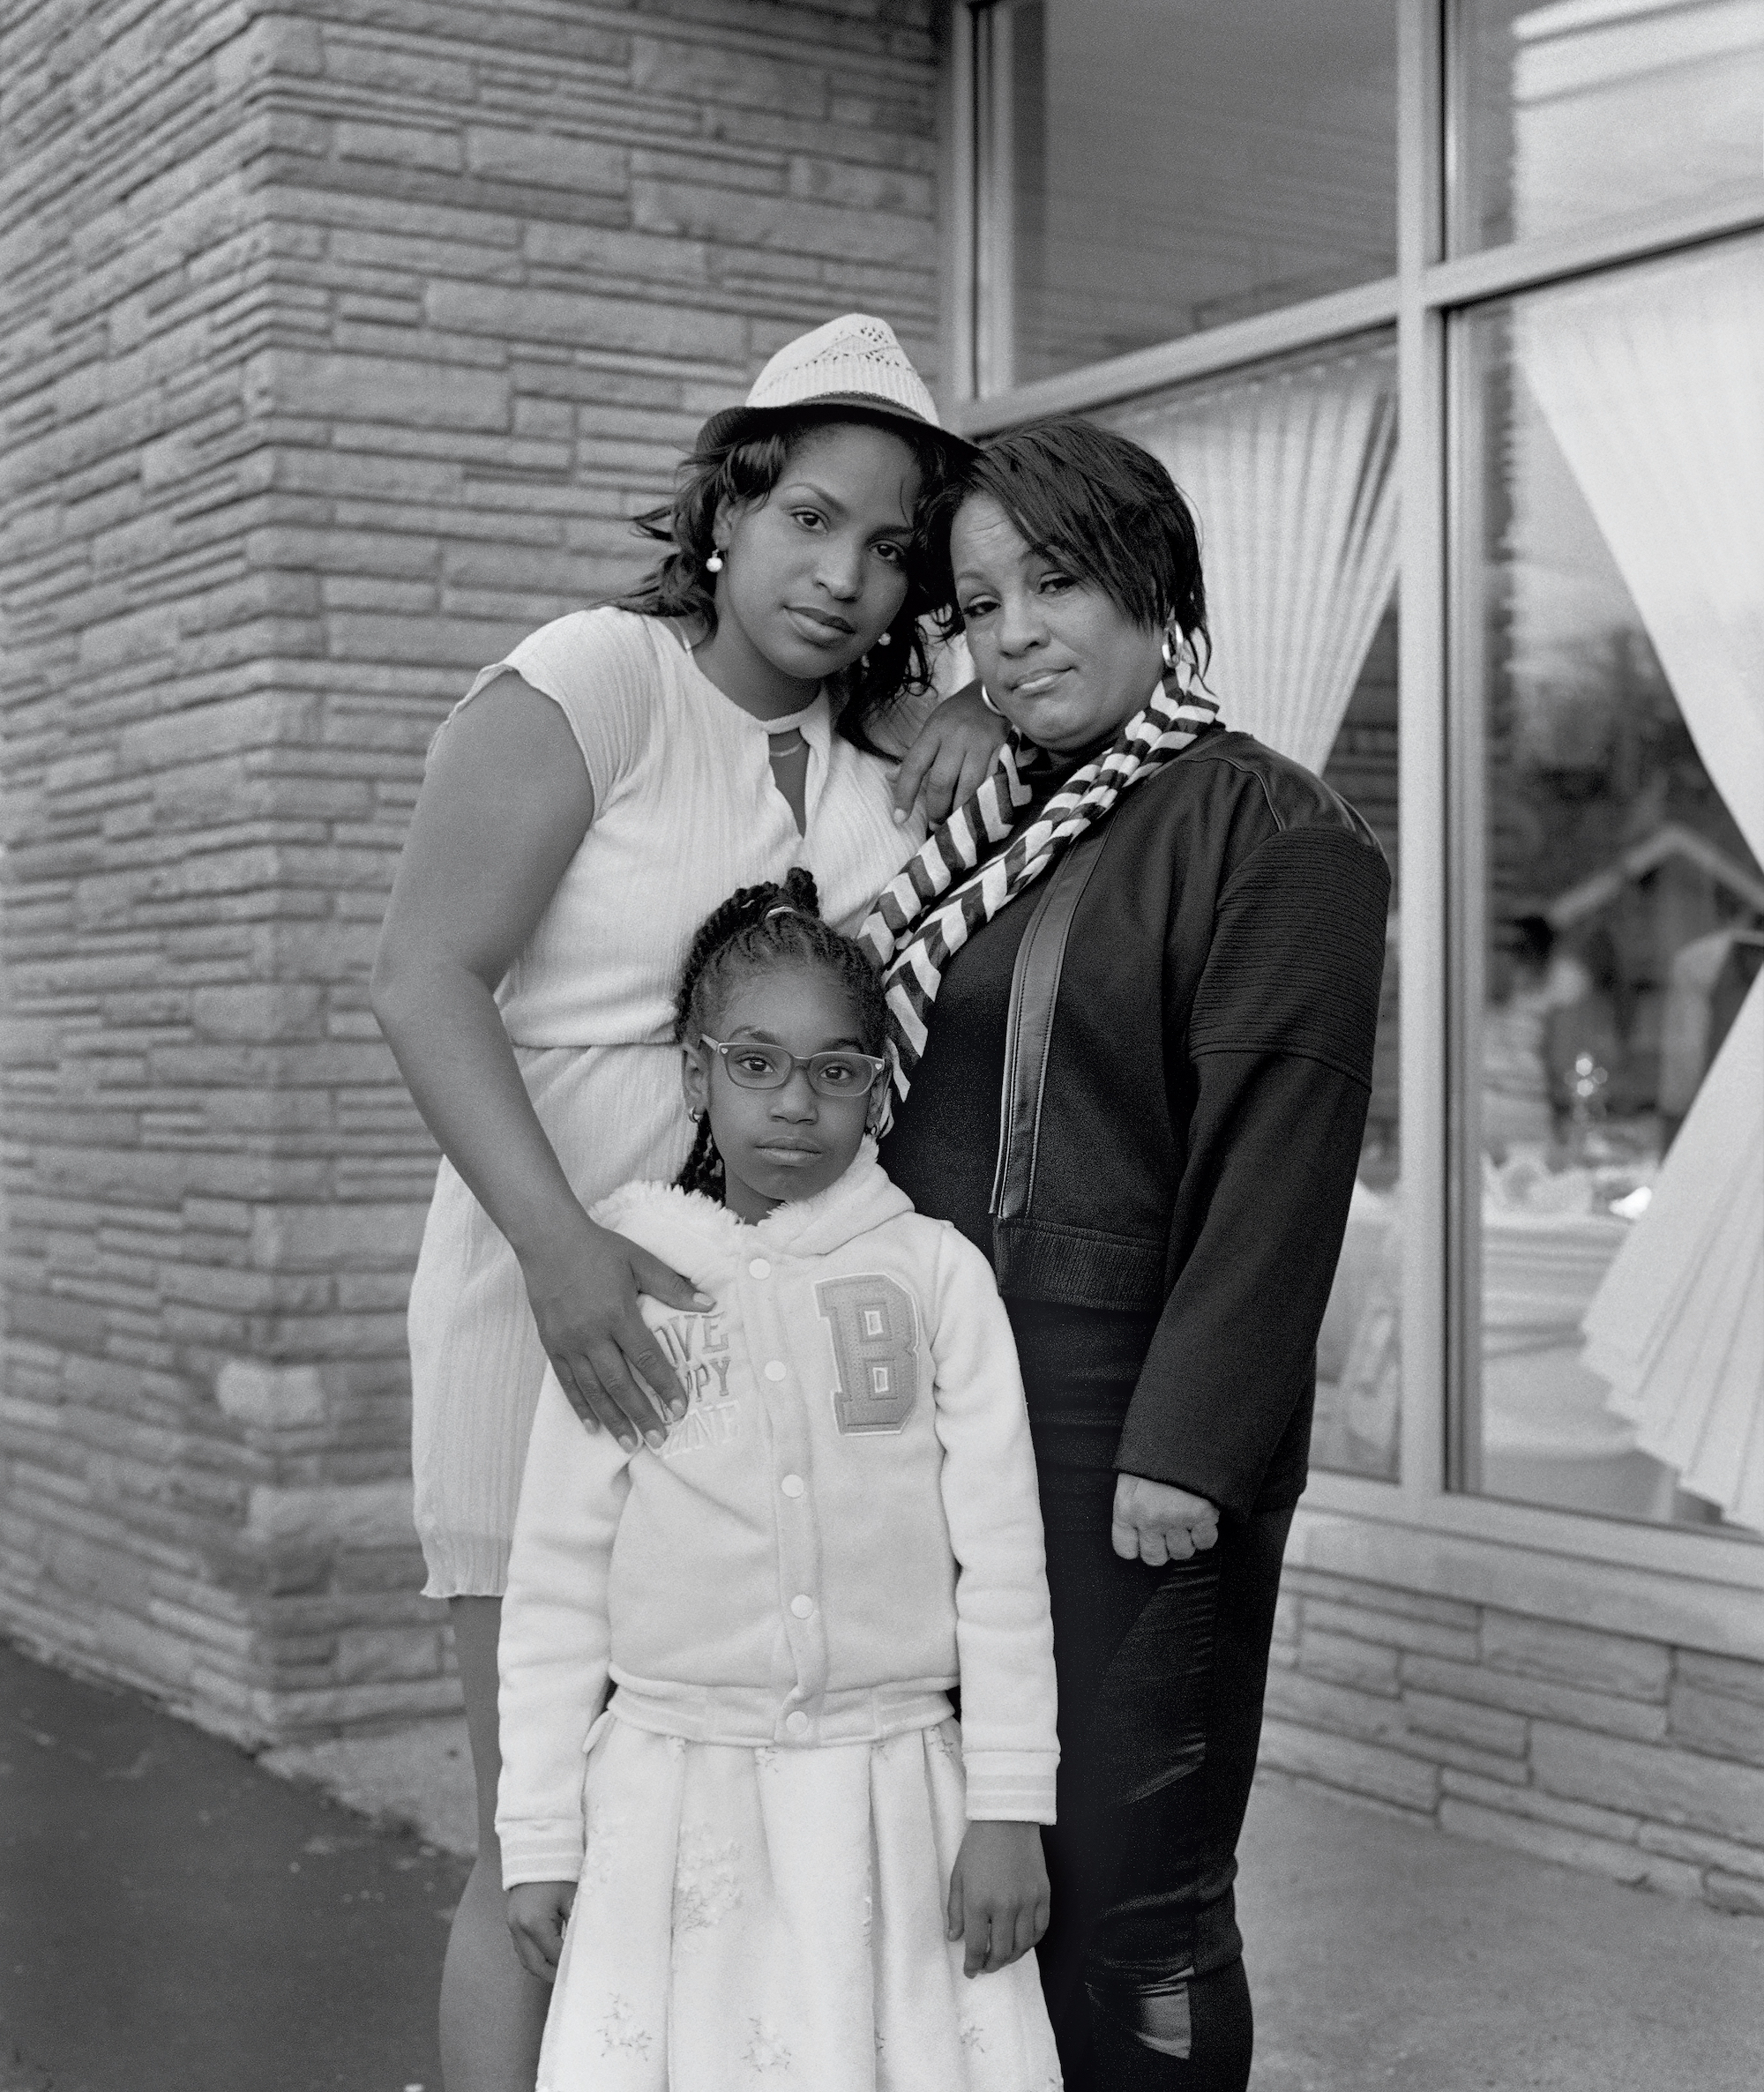 Flint Is Family Part I, LaToya Ruby Frazier, 2016–17. Image credit: © Courtesy of LaToya Ruby Frazier and Gavin Brown’s enterprise, New York and Rome 